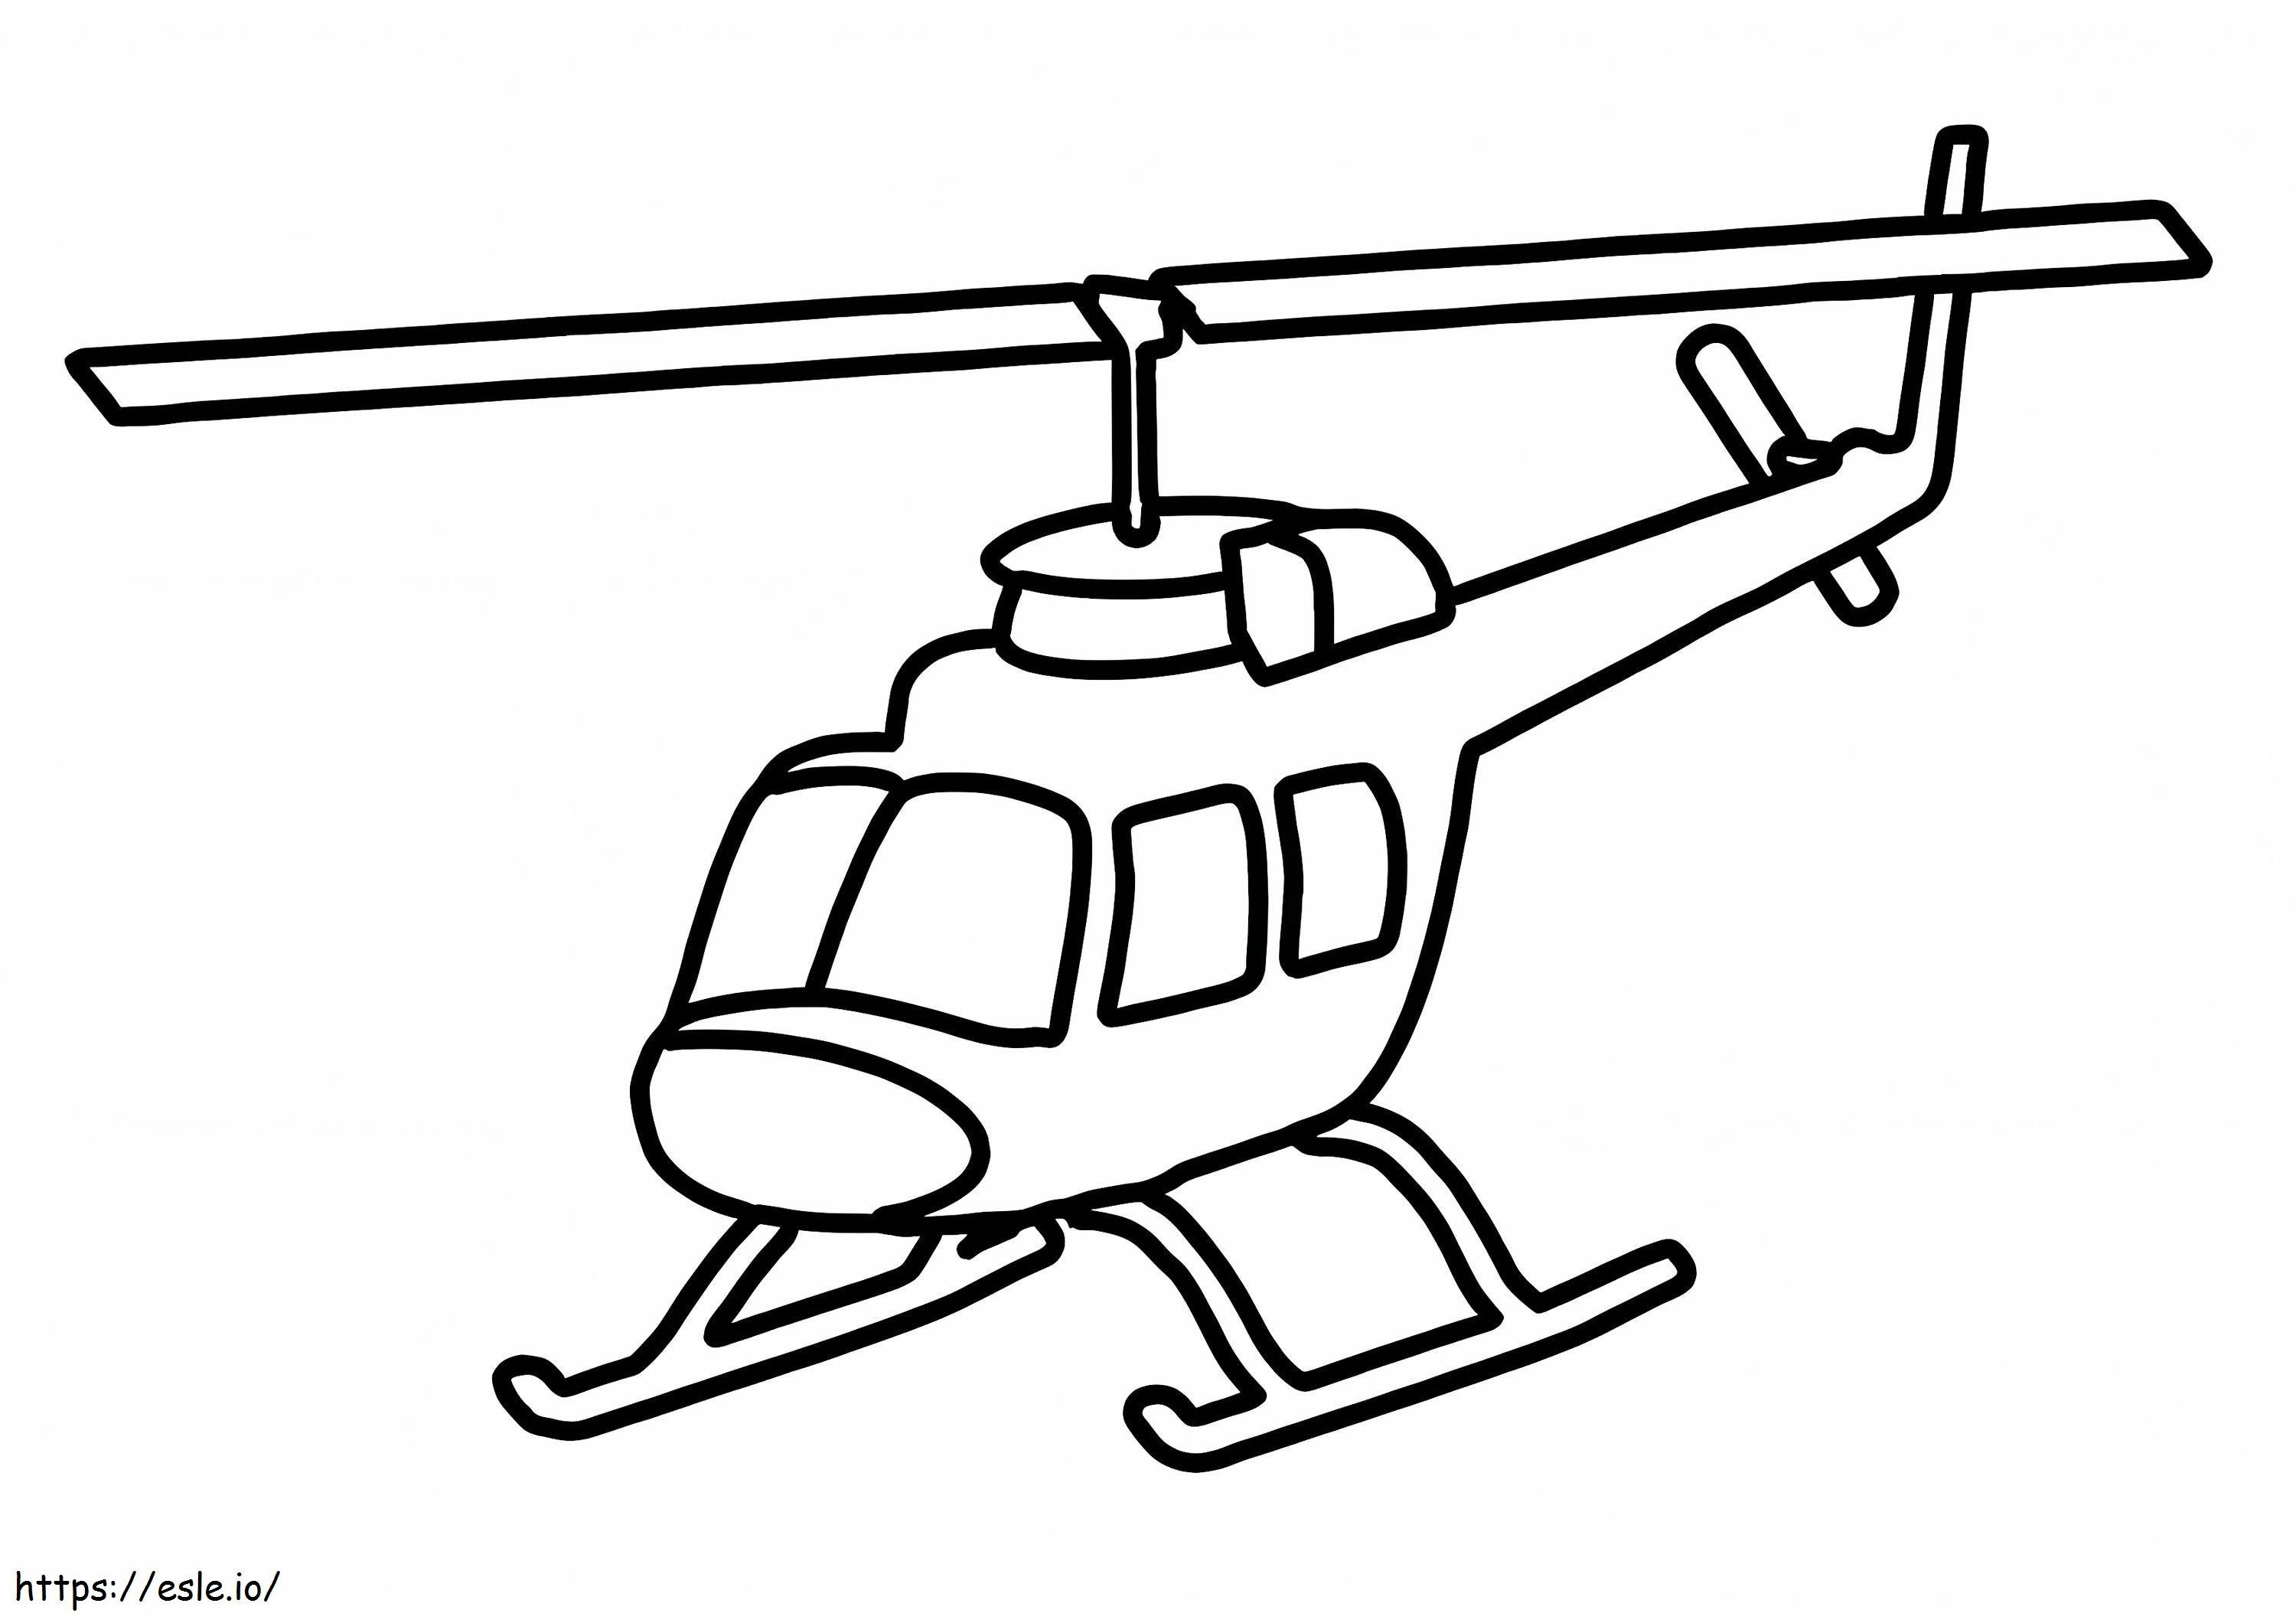 Incredible Helicopter coloring page